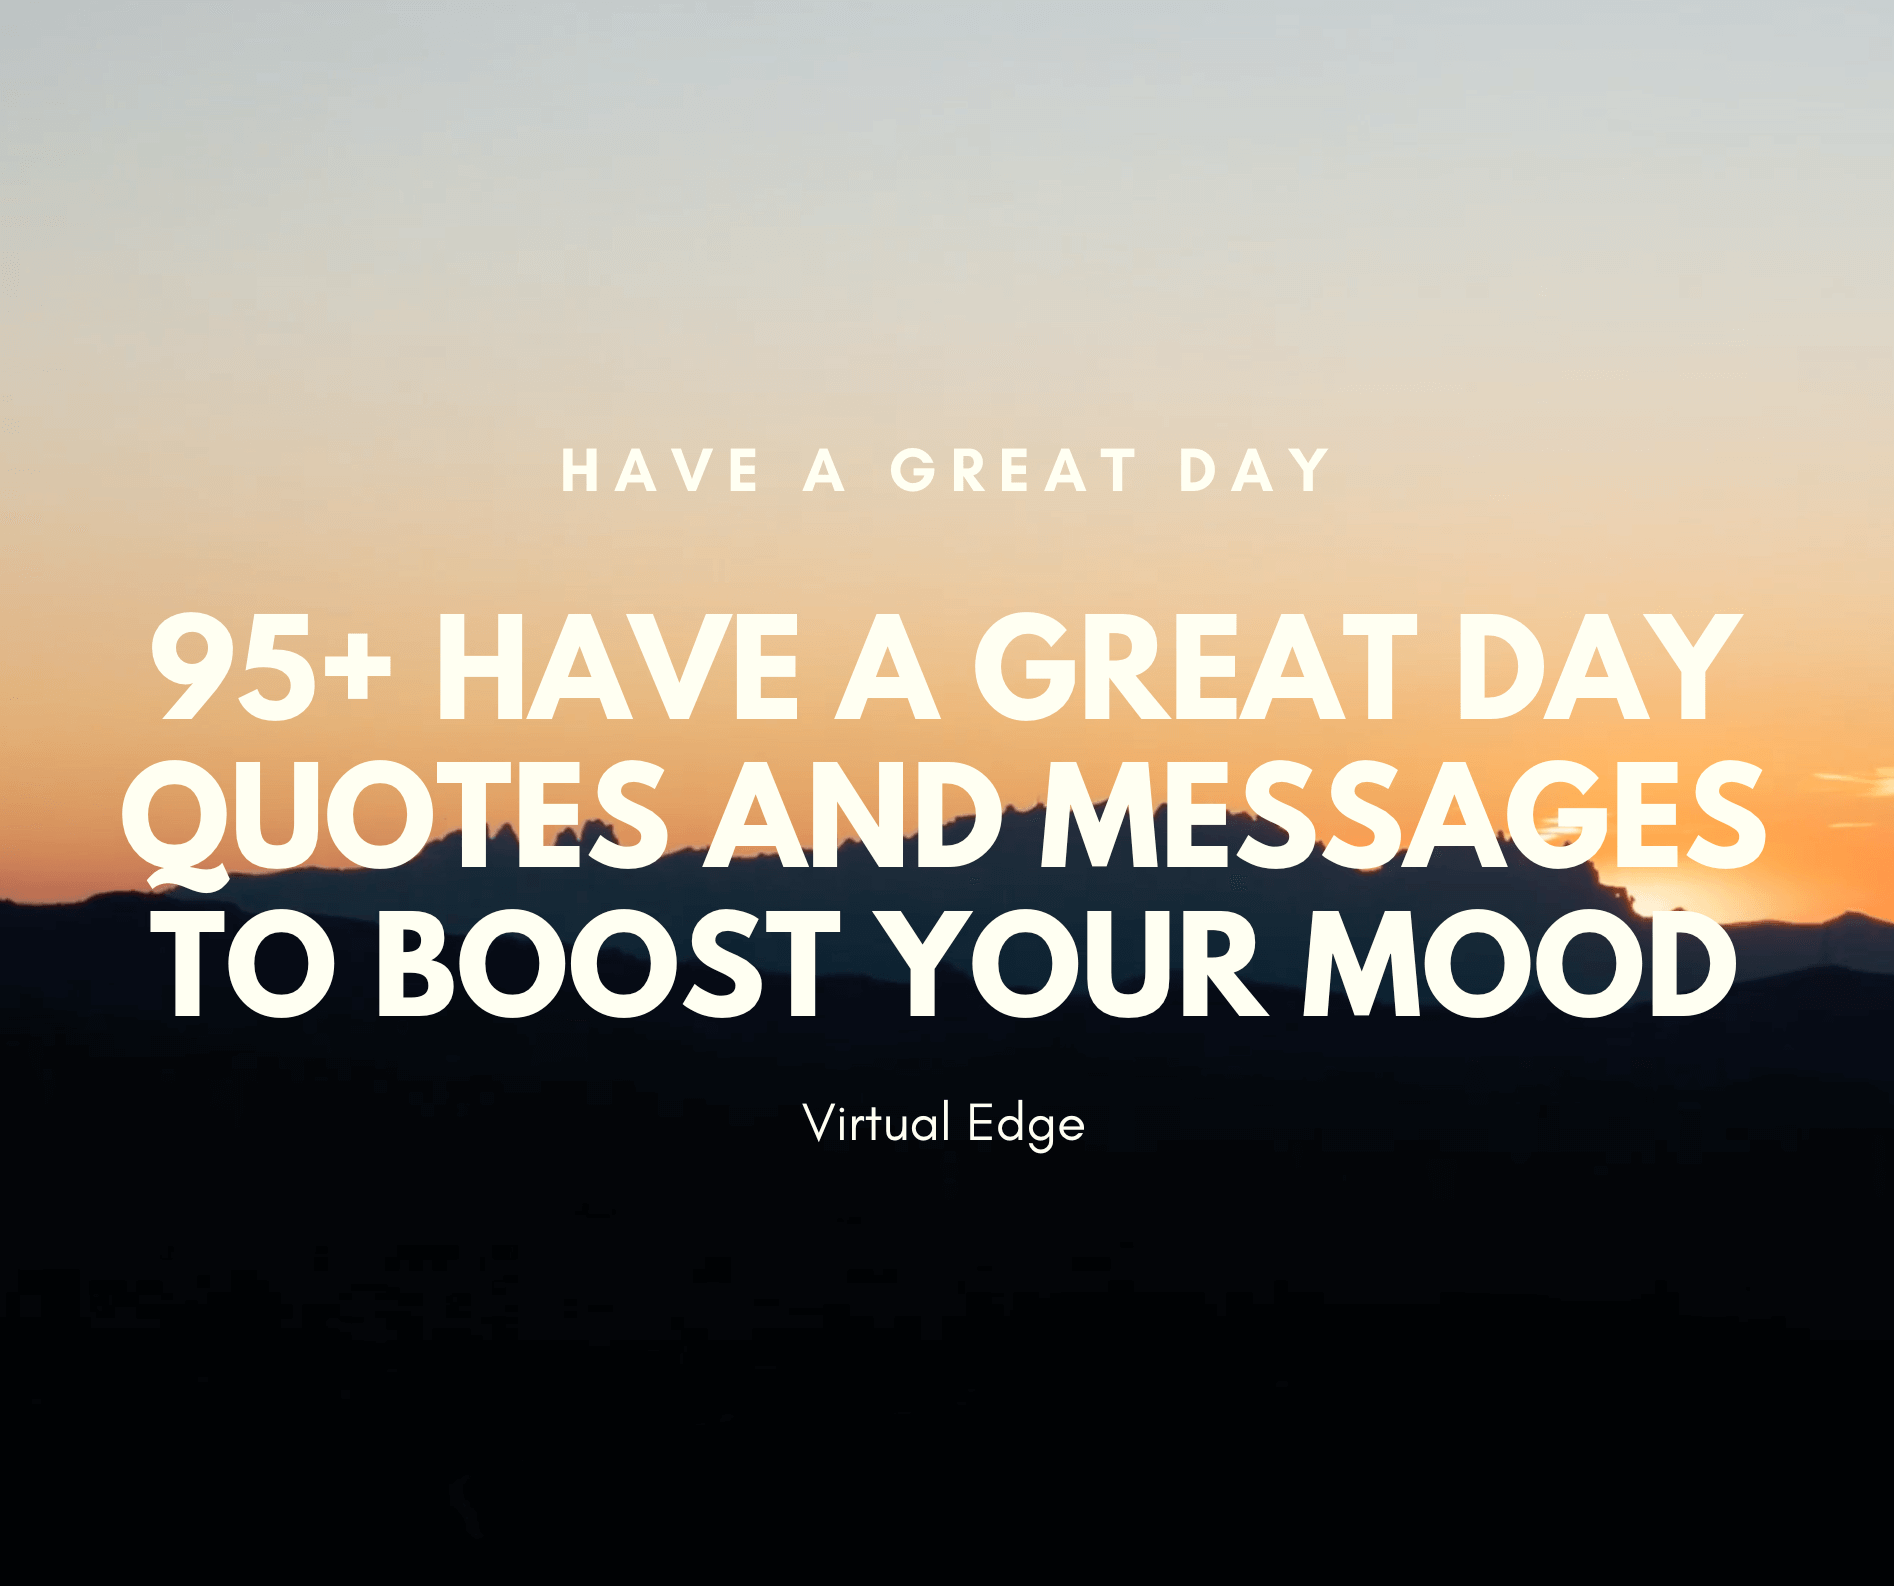 95+ Have a Great Day Quotes and Messages to Boost Your Mood